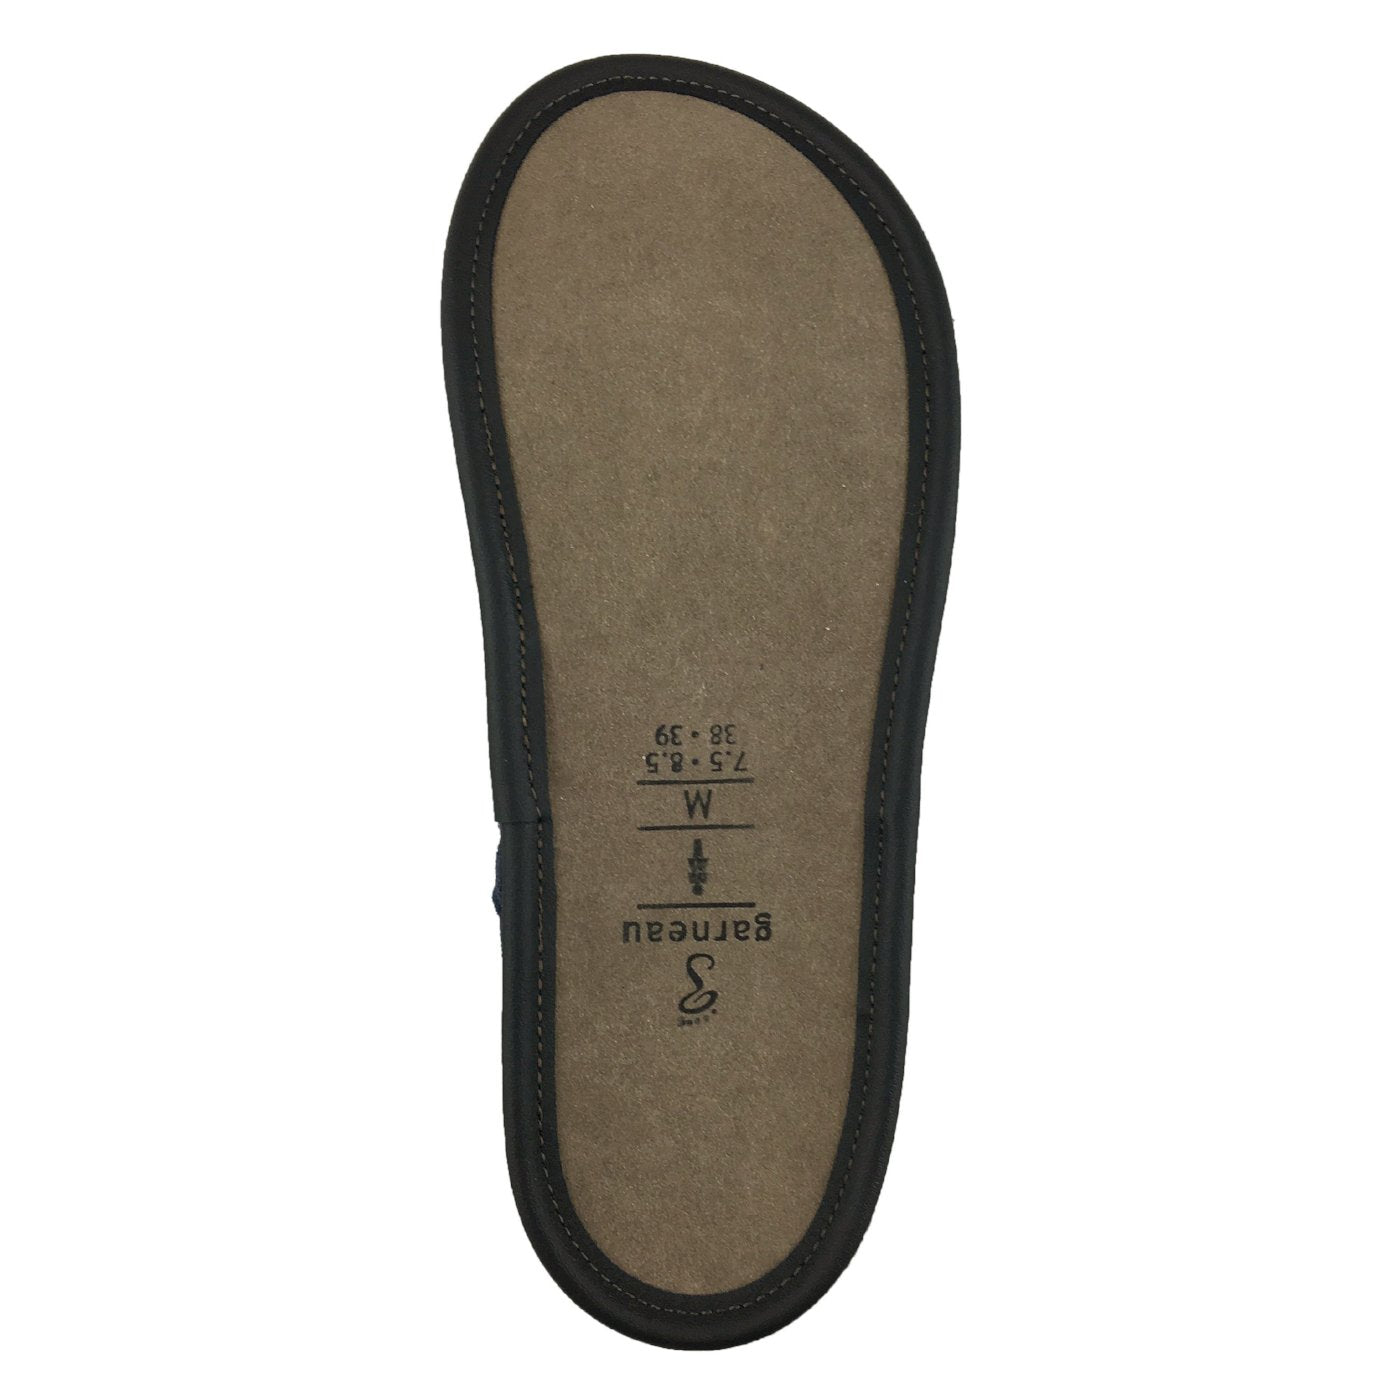 Women's Sheepskin Lazybone Slippers with EVA Soles (Final Clearance S ONLY)